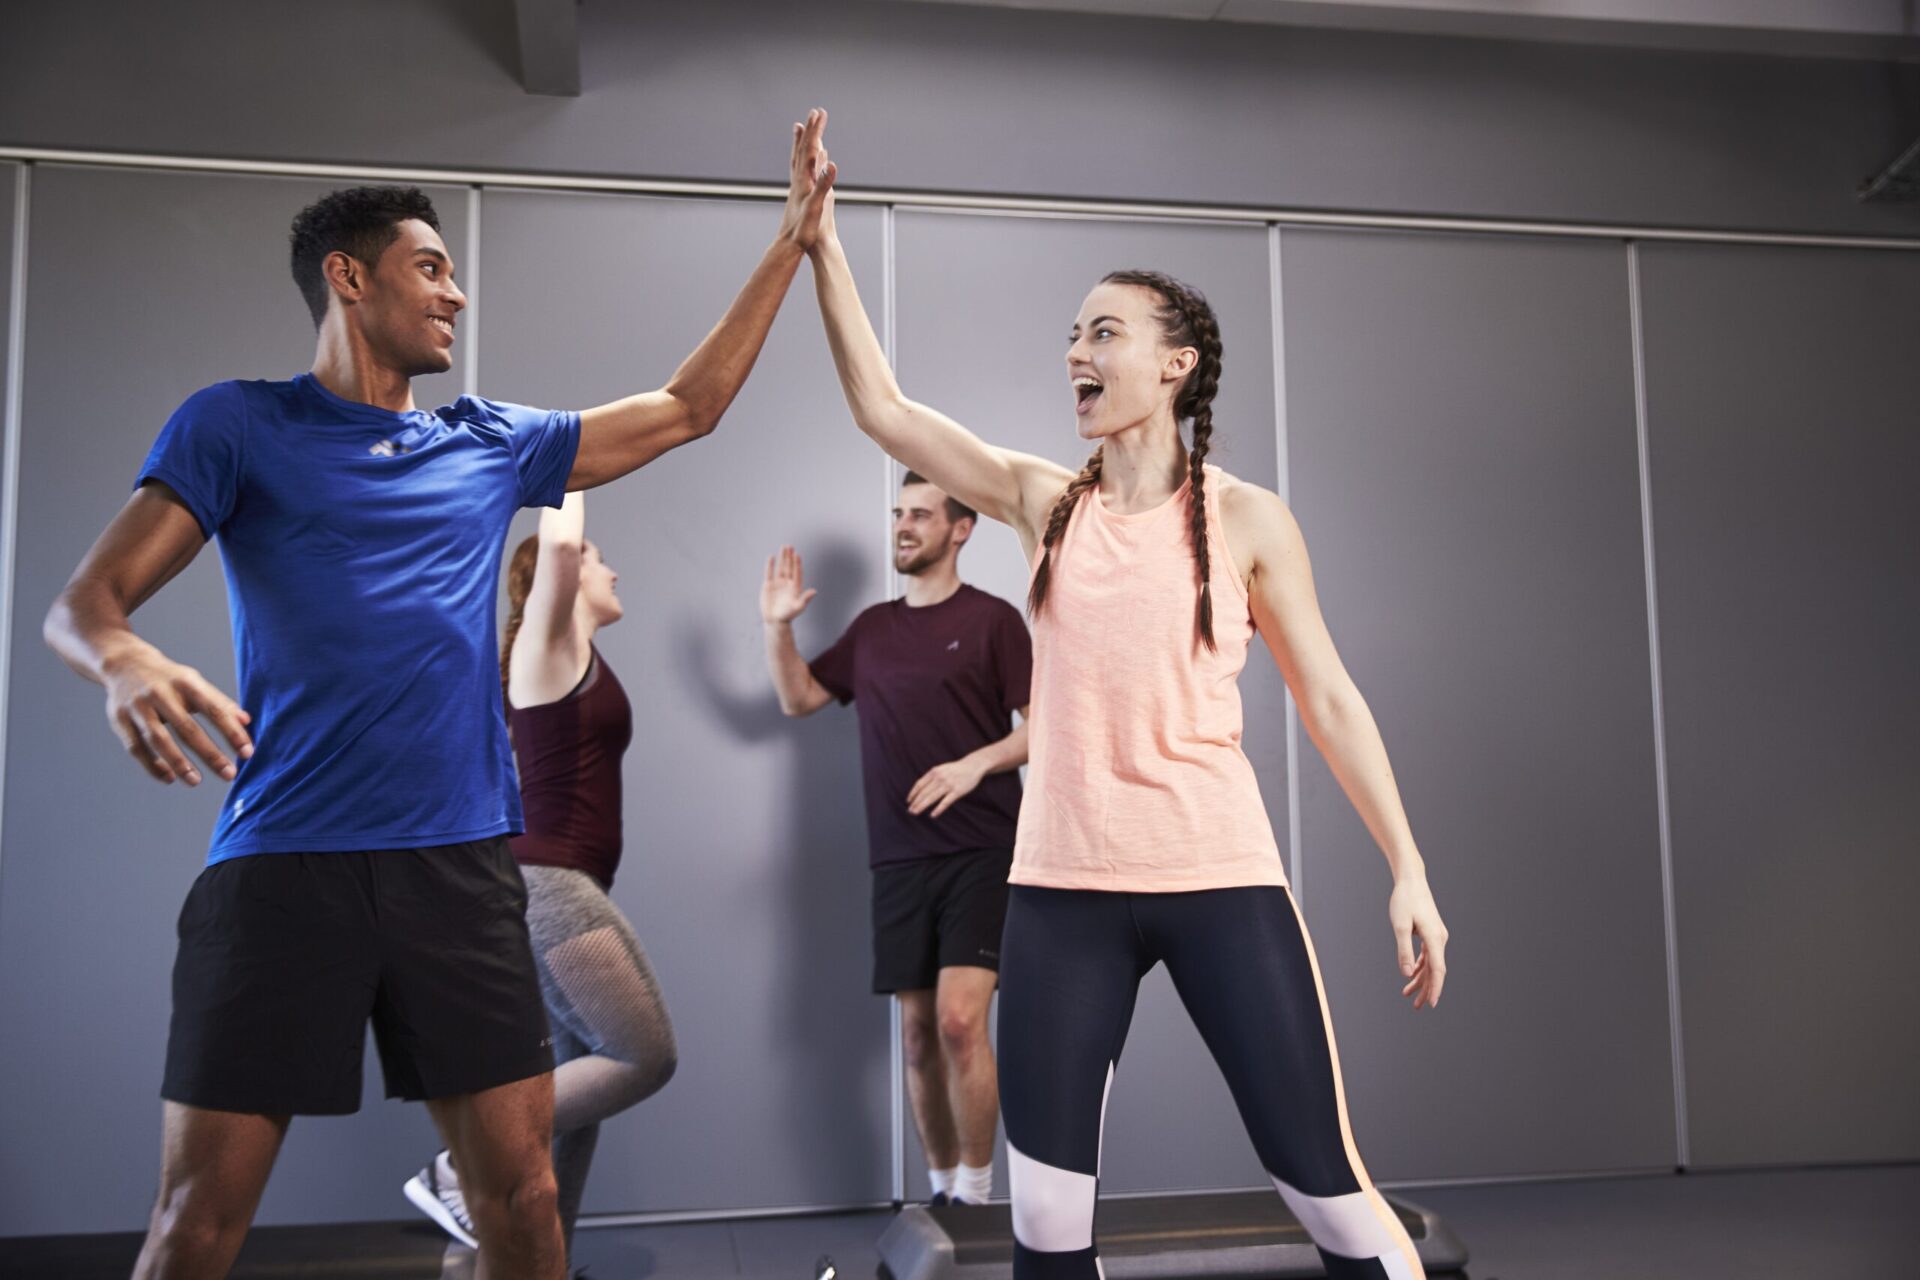 Anytime Fitness To Surpass 200 UK Clubs Landmark in 2022 As Impressive Growth Continues